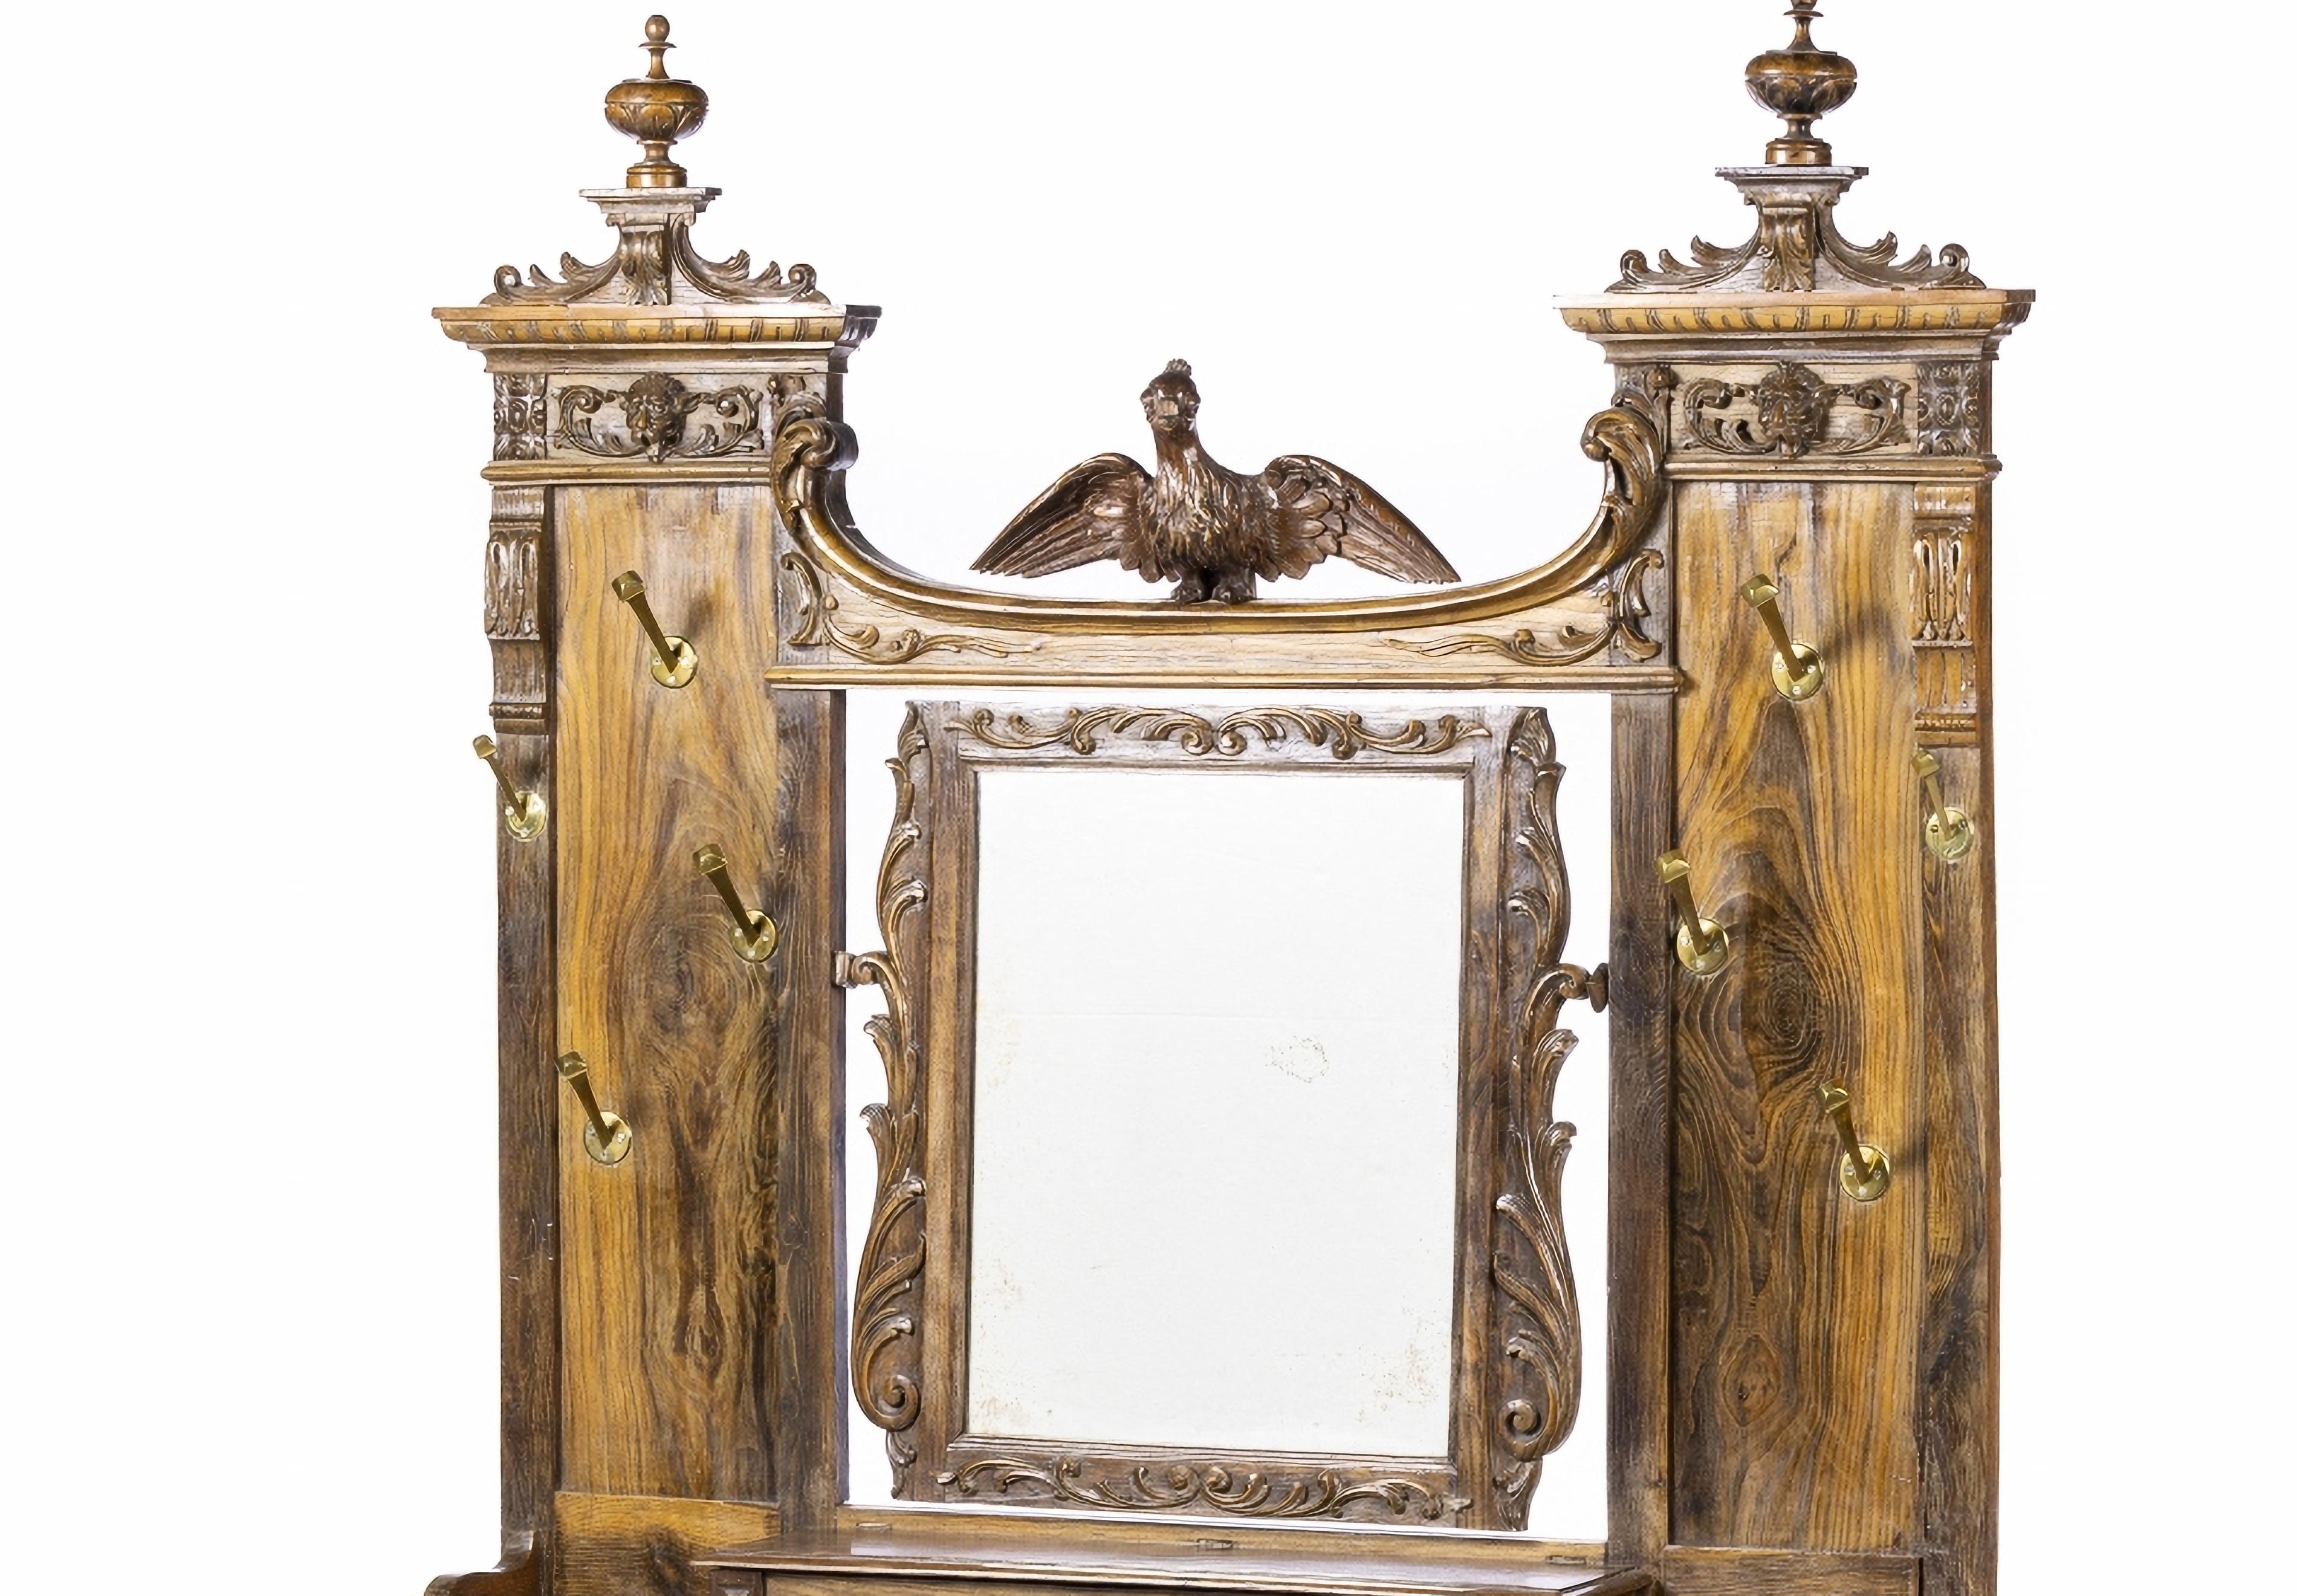 German black forest clothing stand.

From the 19th century,
in oak wood decorated with fantastic animals and plant elements.
Dim.: 200 x 136 x 28 cm.
Good conditions.